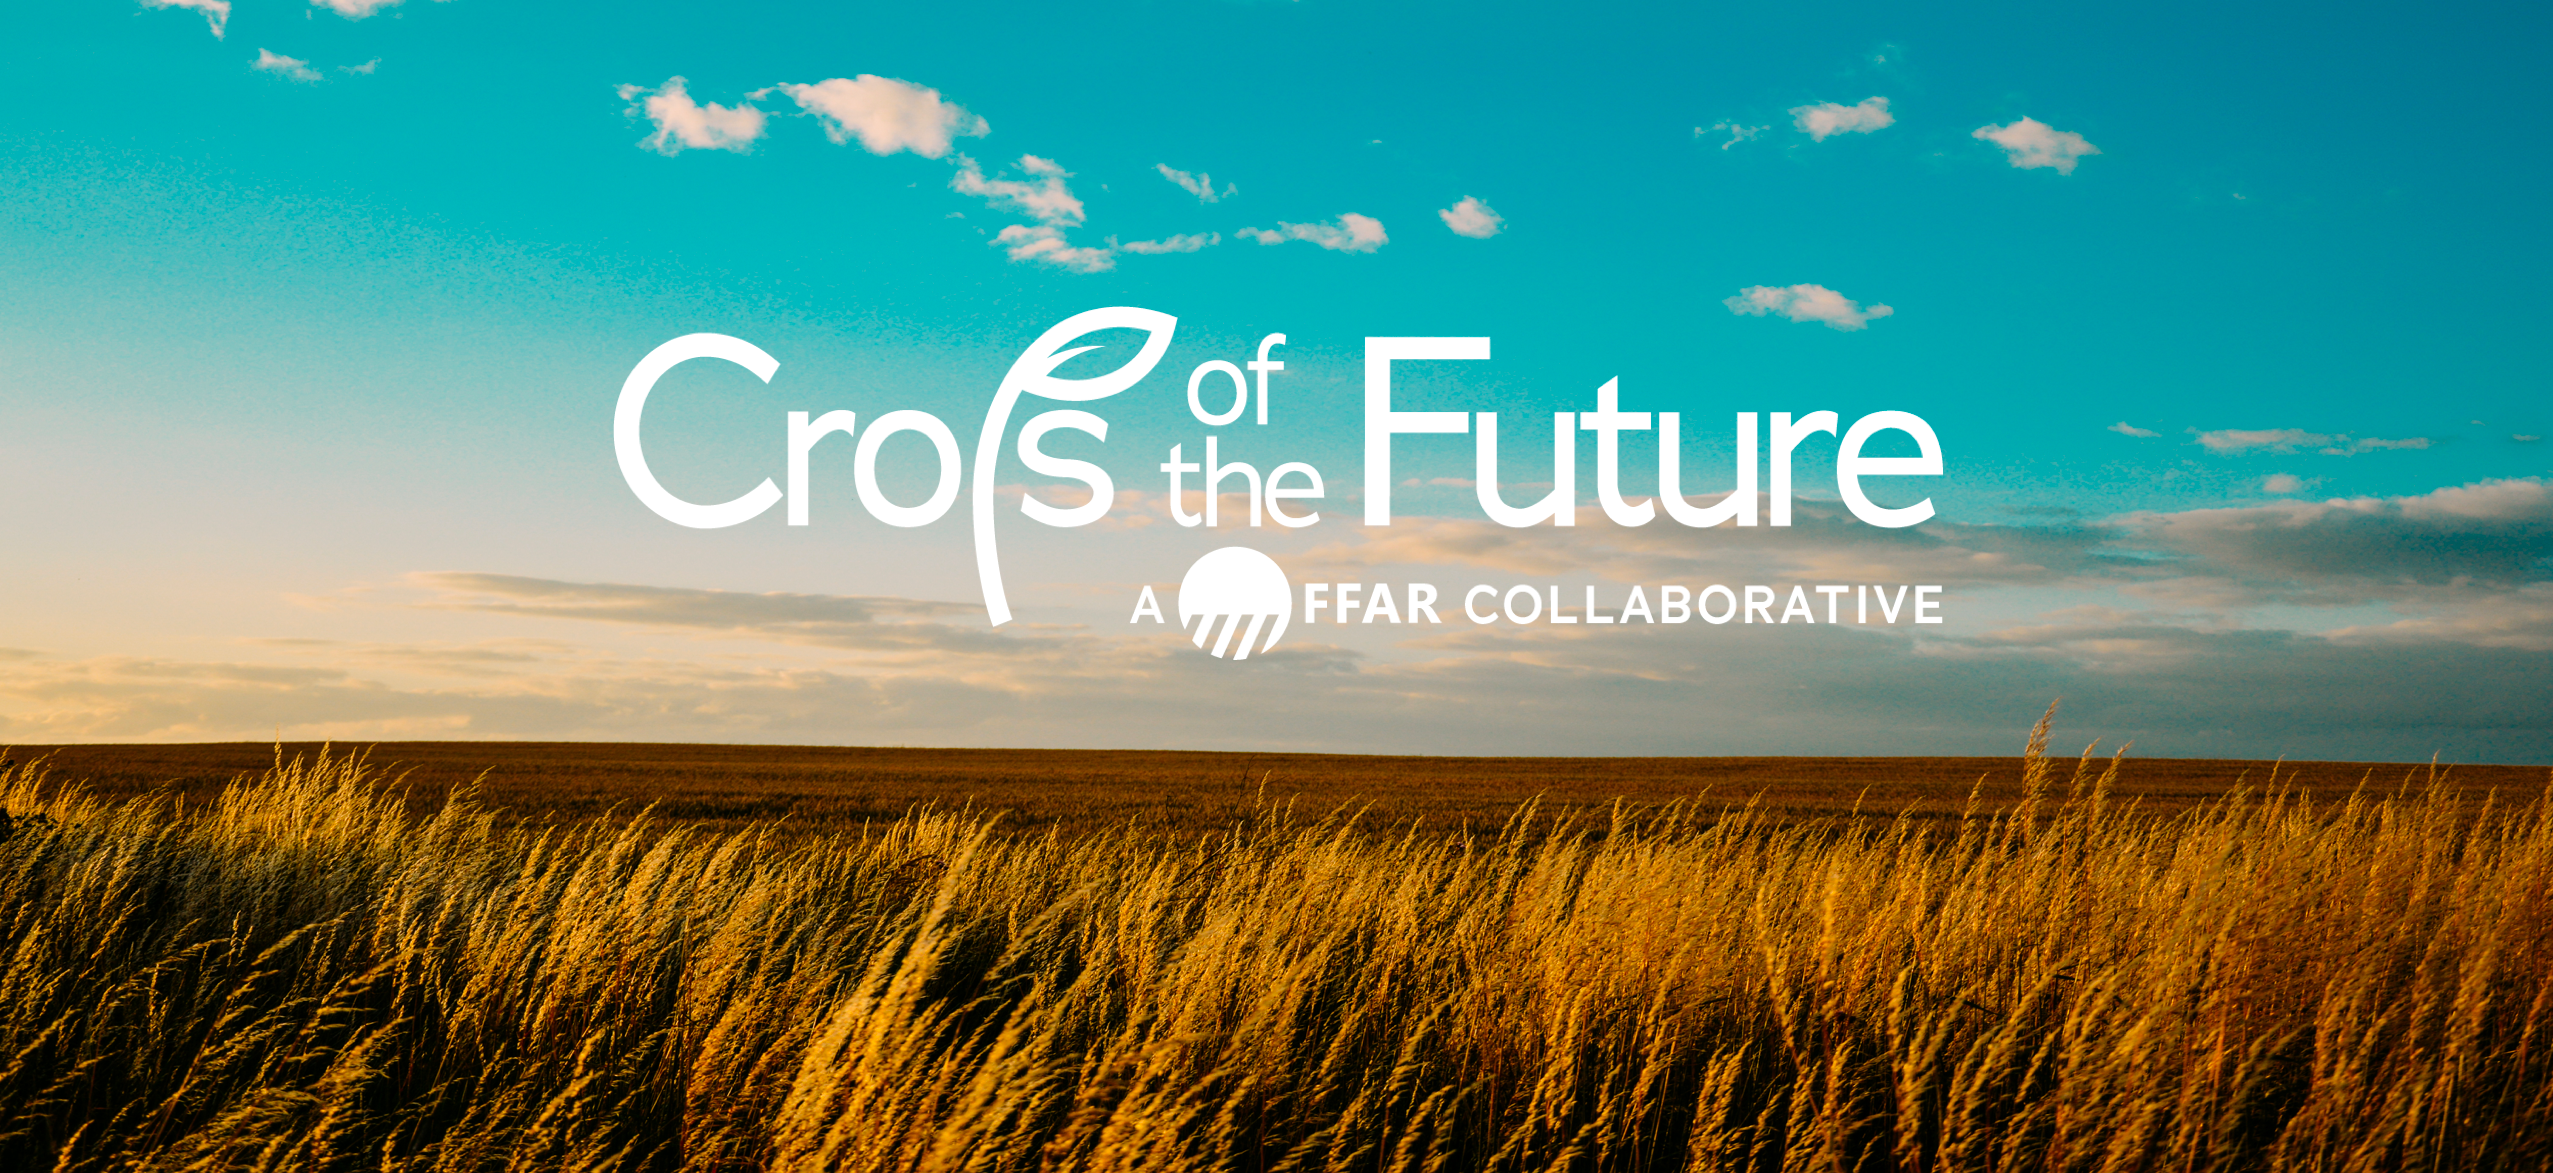 KWS_crops_of_the_future_key_visual_mit_landschaft.png